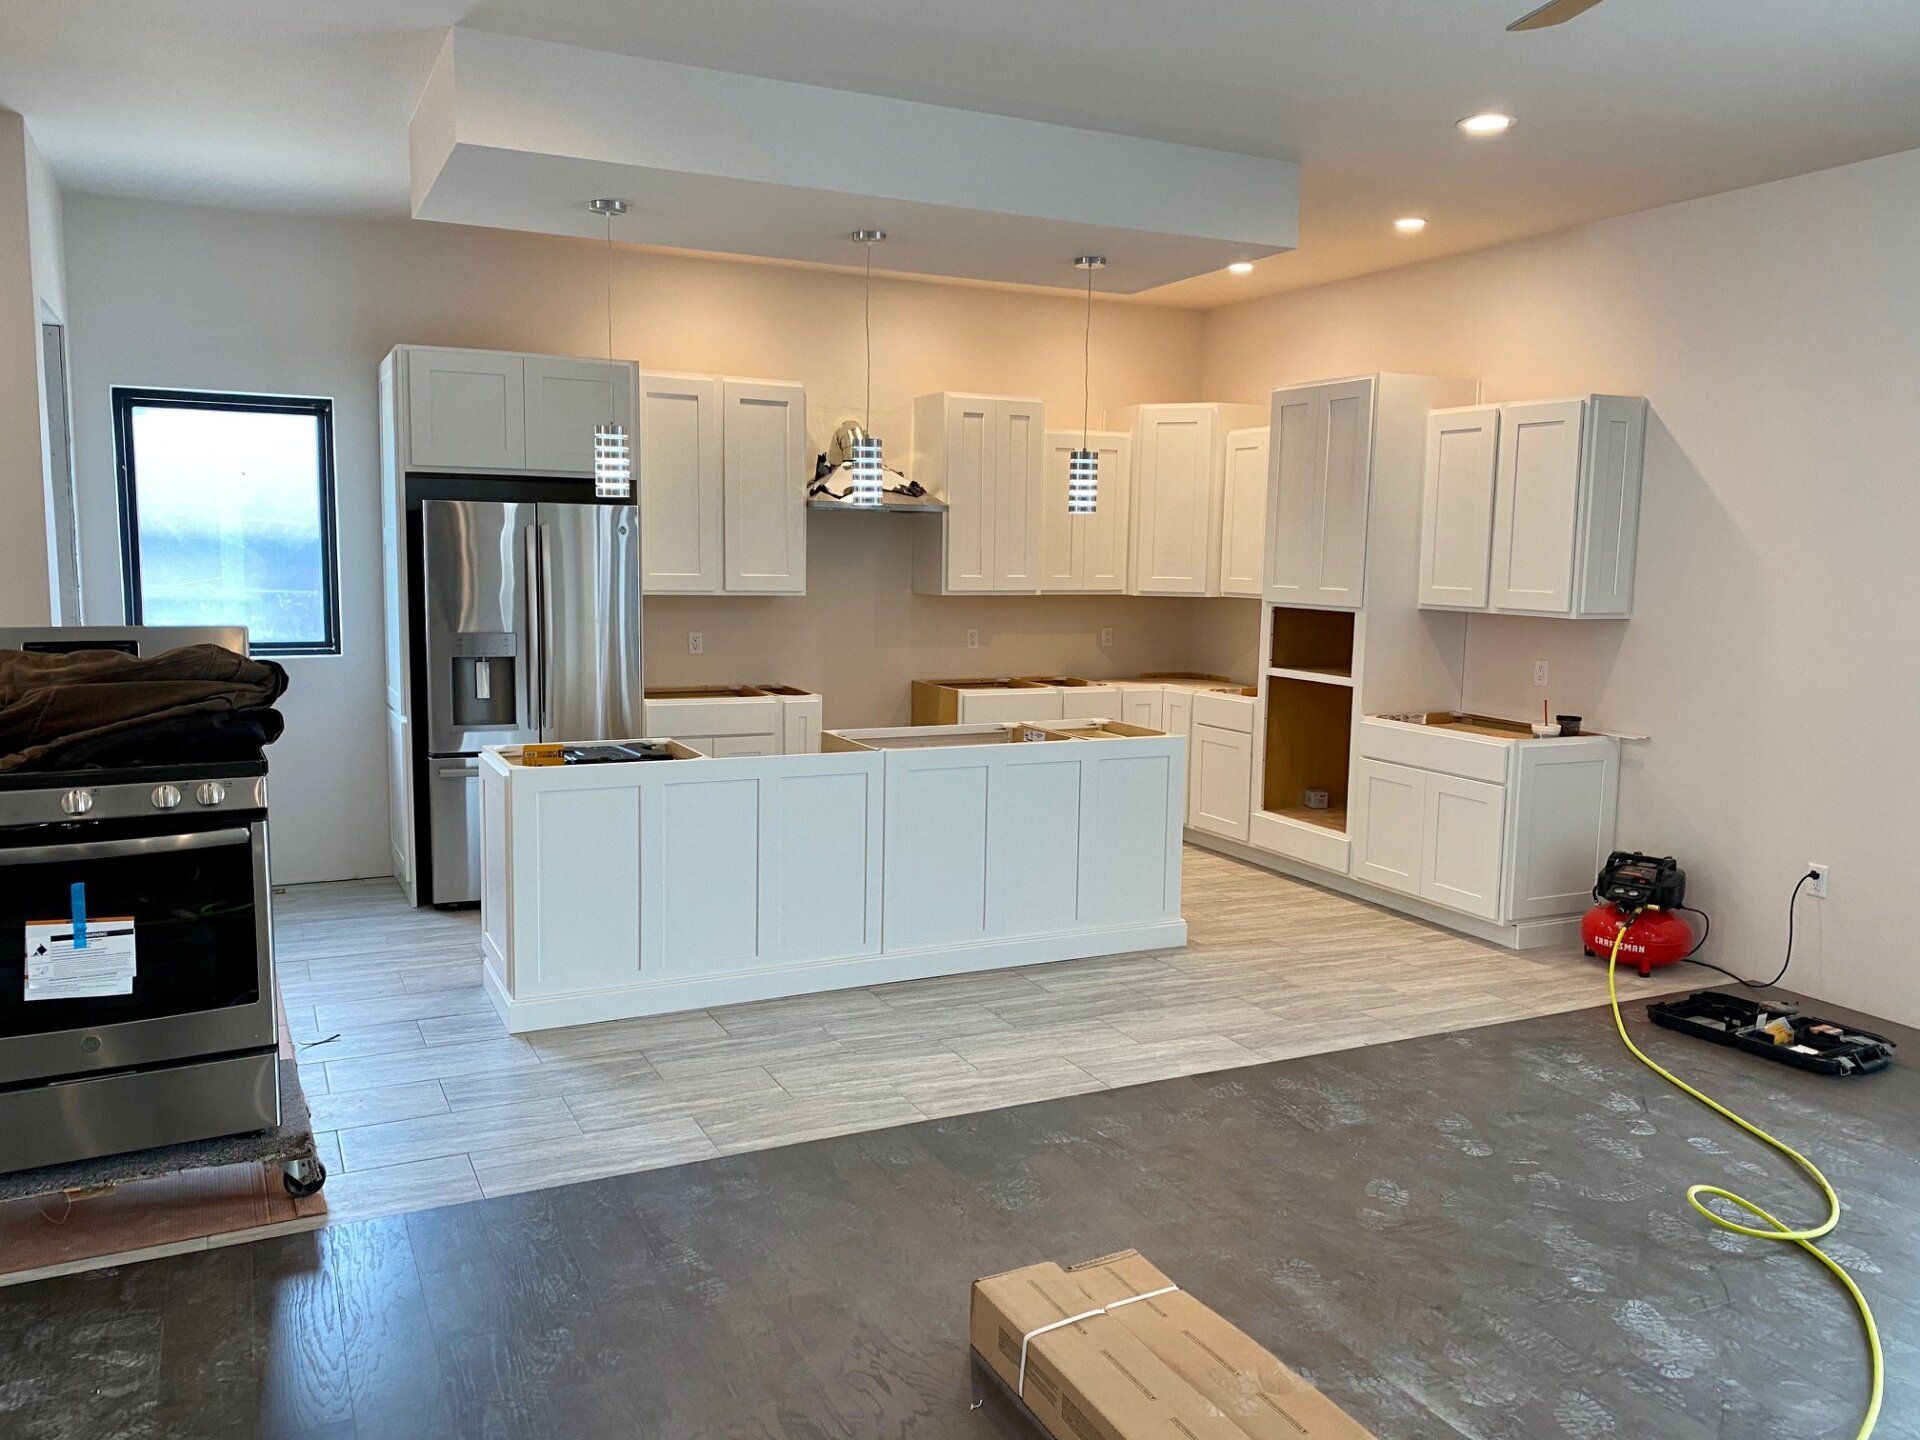 A Clean, Modern Kitchen Designed Built in Mid-Missouri by Watts Construction